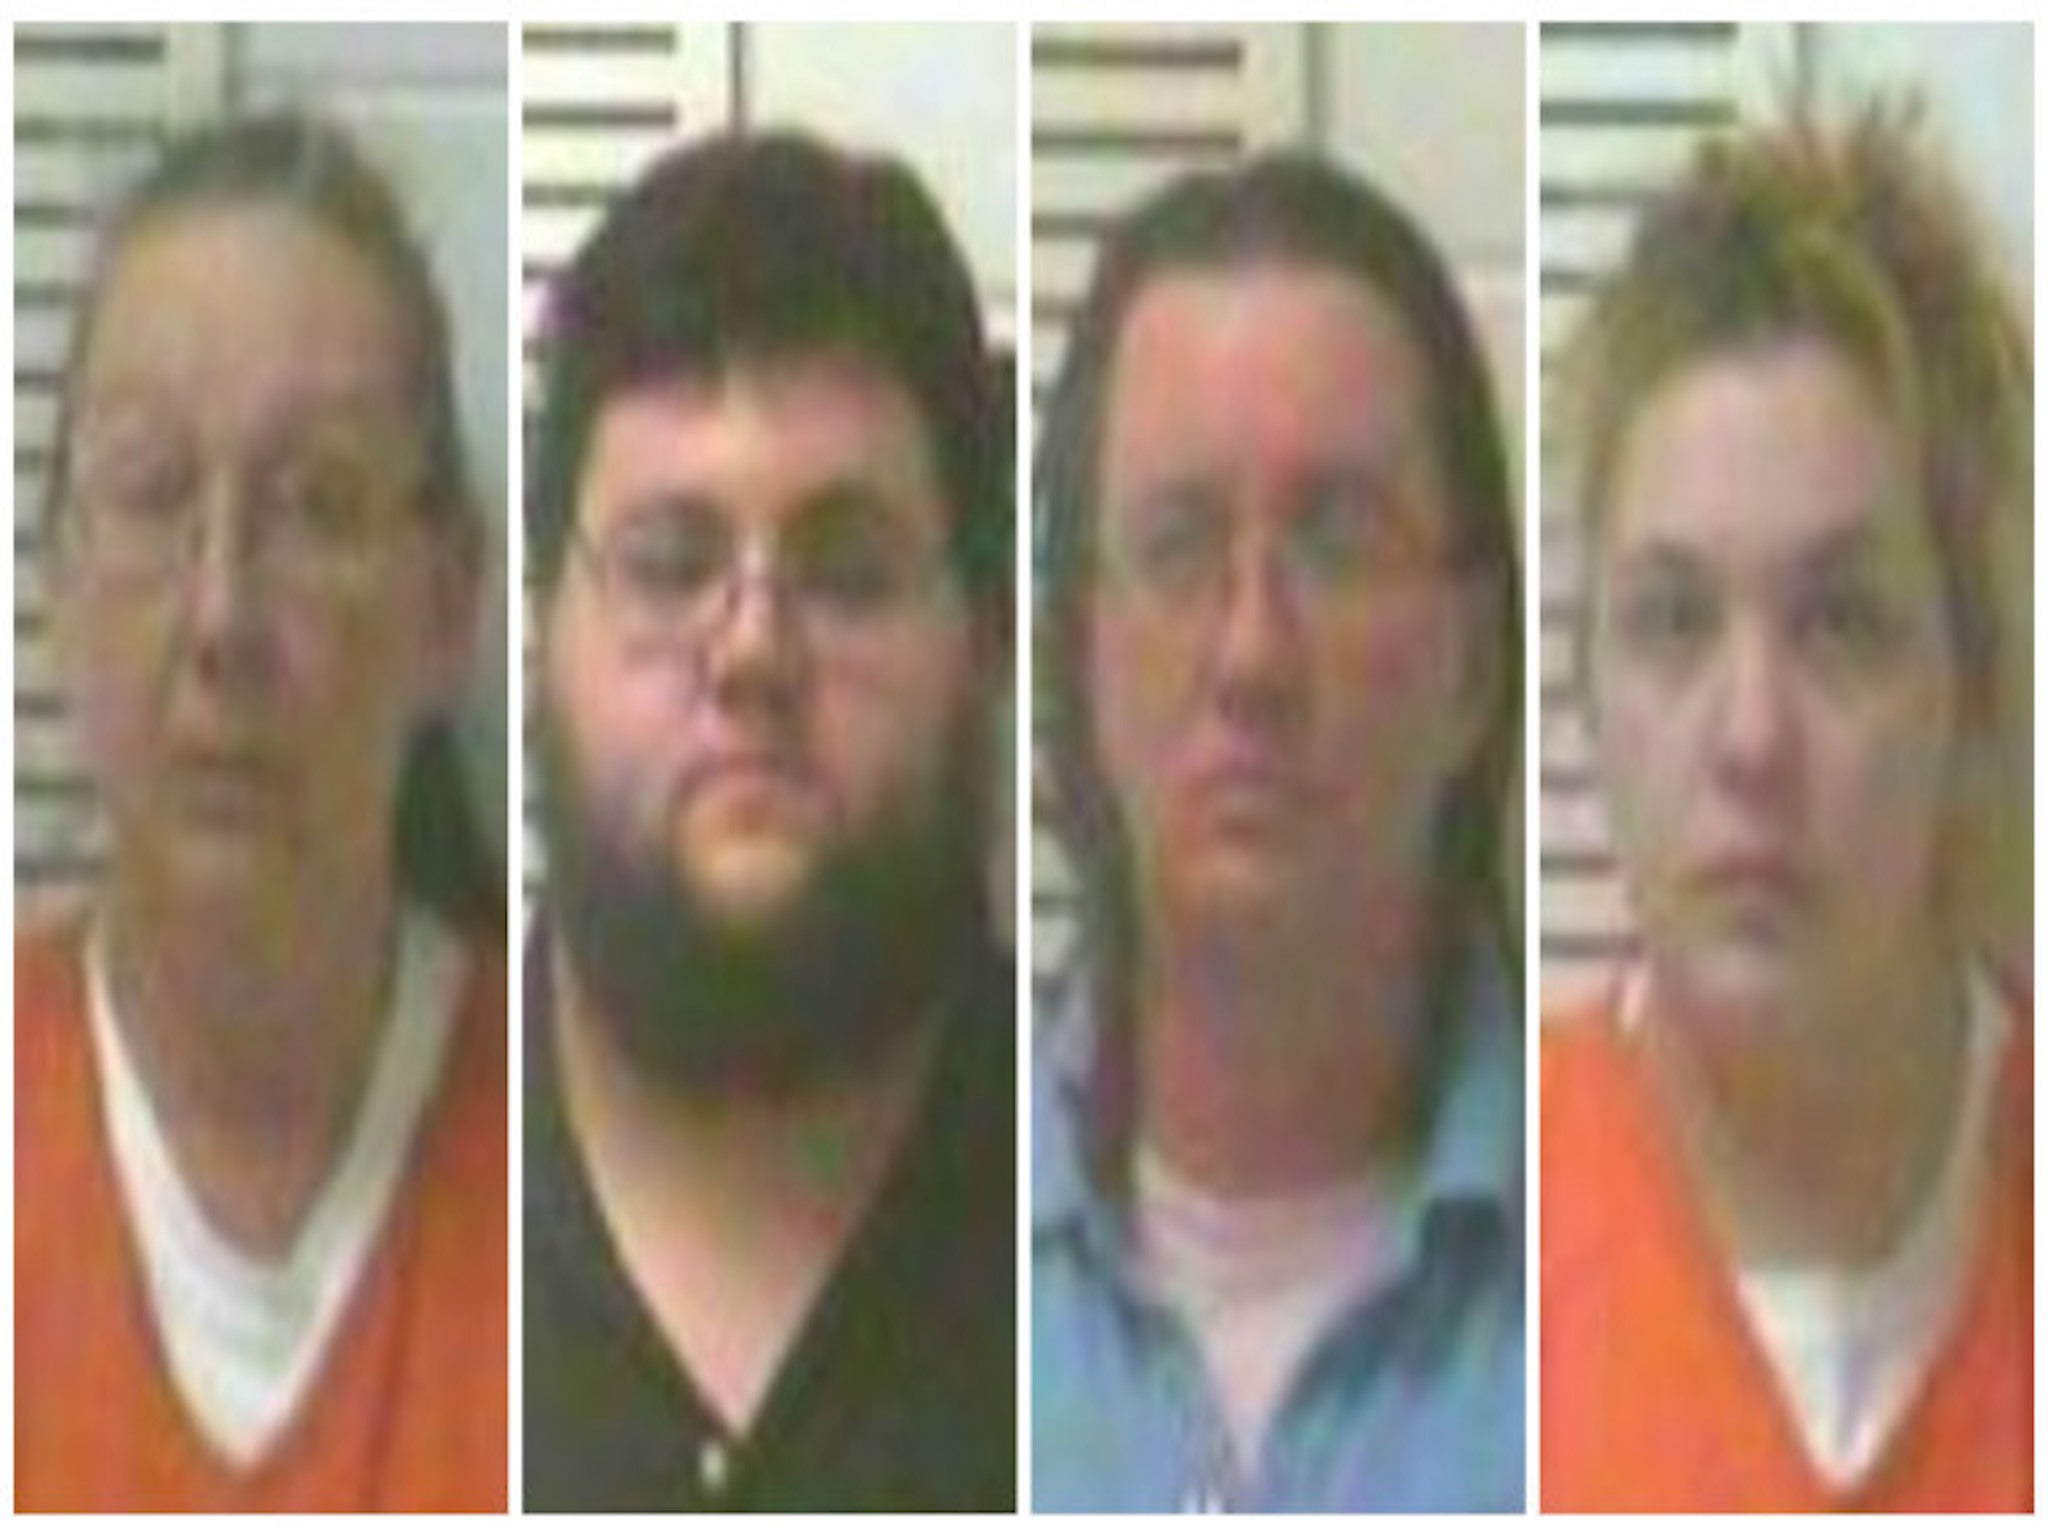 Rose Brewer, Nathan Firoved, Denise Kroutil and Elizabeth Hupp are being held by police in Missouri